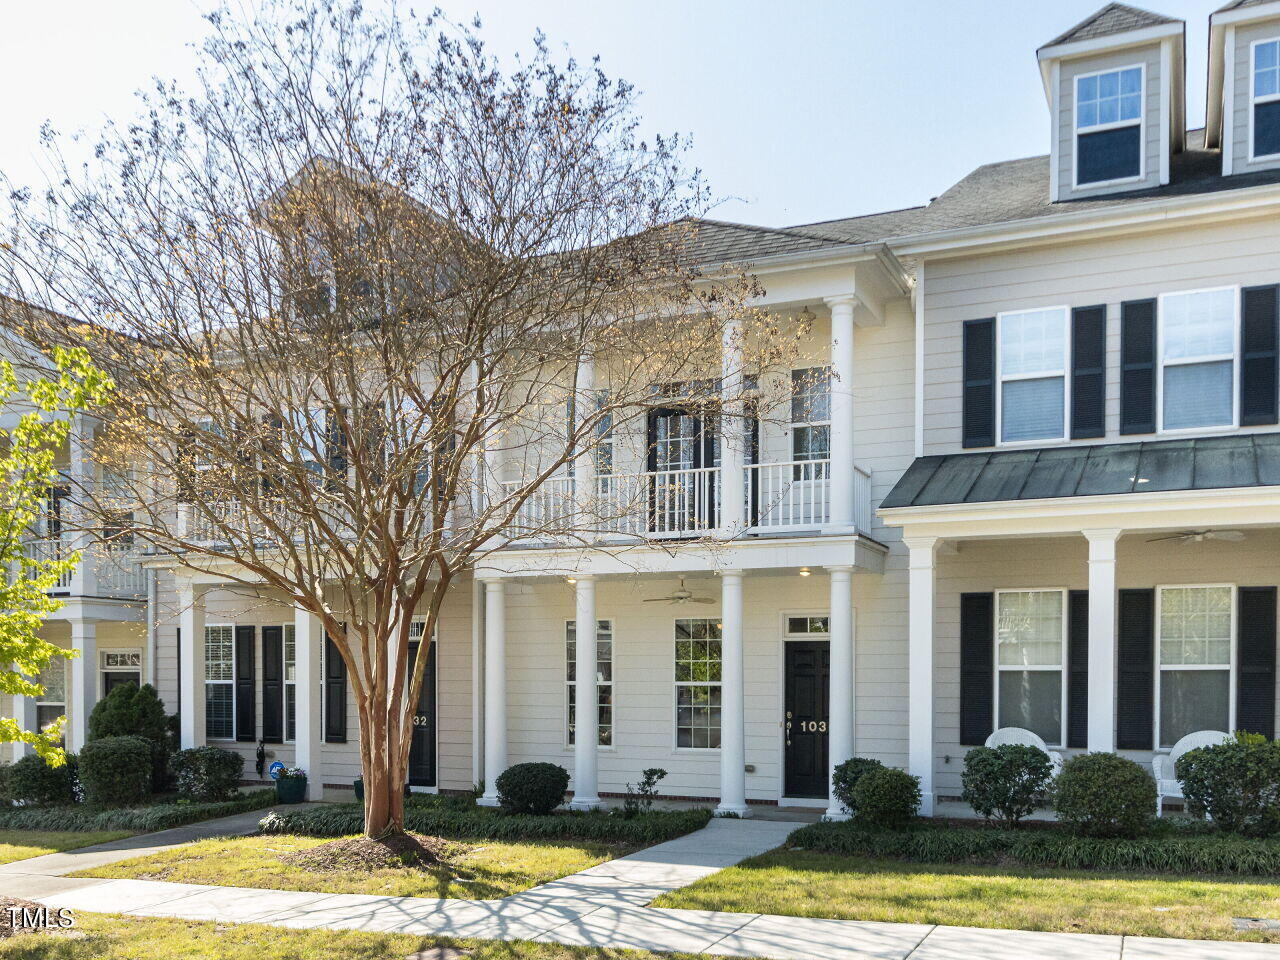 View Chapel Hill, NC 27517 townhome